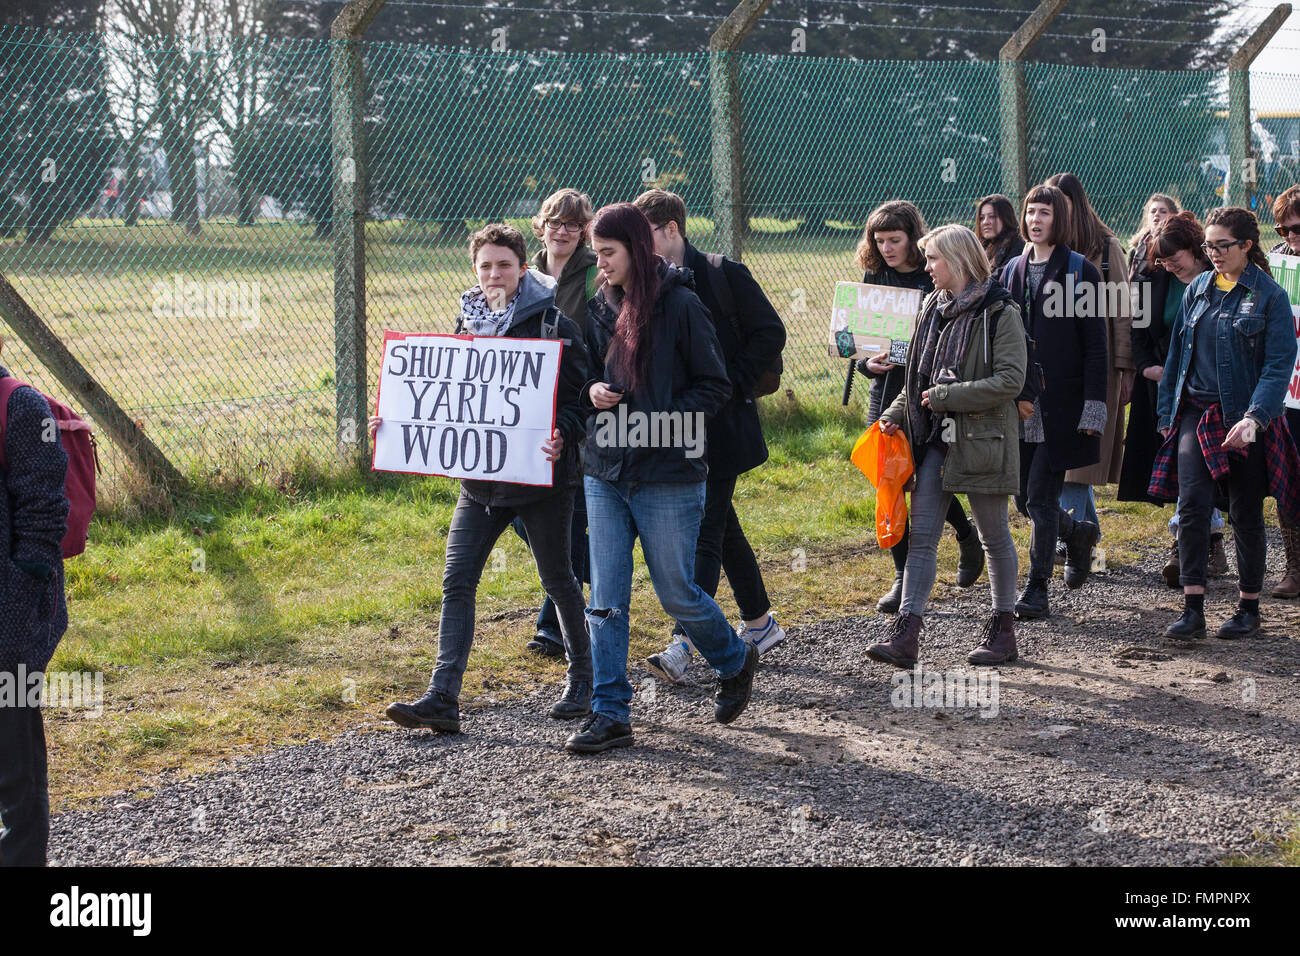 Milton Ernest, UK. 12th March, 2016. Campaigners against immigration detention call for the closure of Yarl’s Wood Immigration Removal Centre in Bedfordshire. Credit:  Mark Kerrison/Alamy Live News Stock Photo